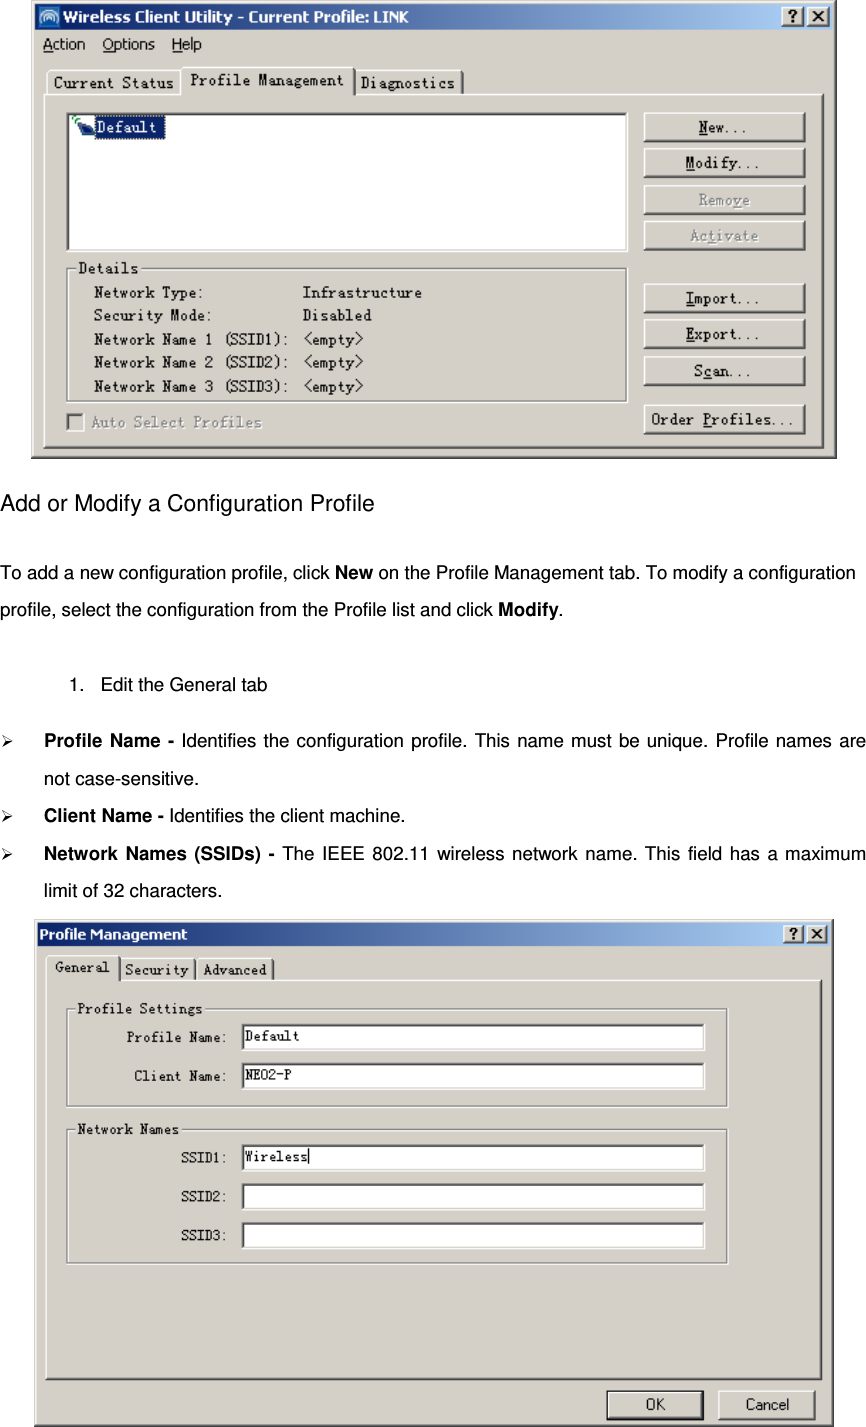  Add or Modify a Configuration Profile To add a new configuration profile, click New on the Profile Management tab. To modify a configuration profile, select the configuration from the Profile list and click Modify. 1. Edit the General tab  Profile Name - Identifies the configuration profile. This name must be unique. Profile names are not case-sensitive.  Client Name - Identifies the client machine.  Network Names (SSIDs) - The IEEE 802.11 wireless network name. This field has a maximum limit of 32 characters.   